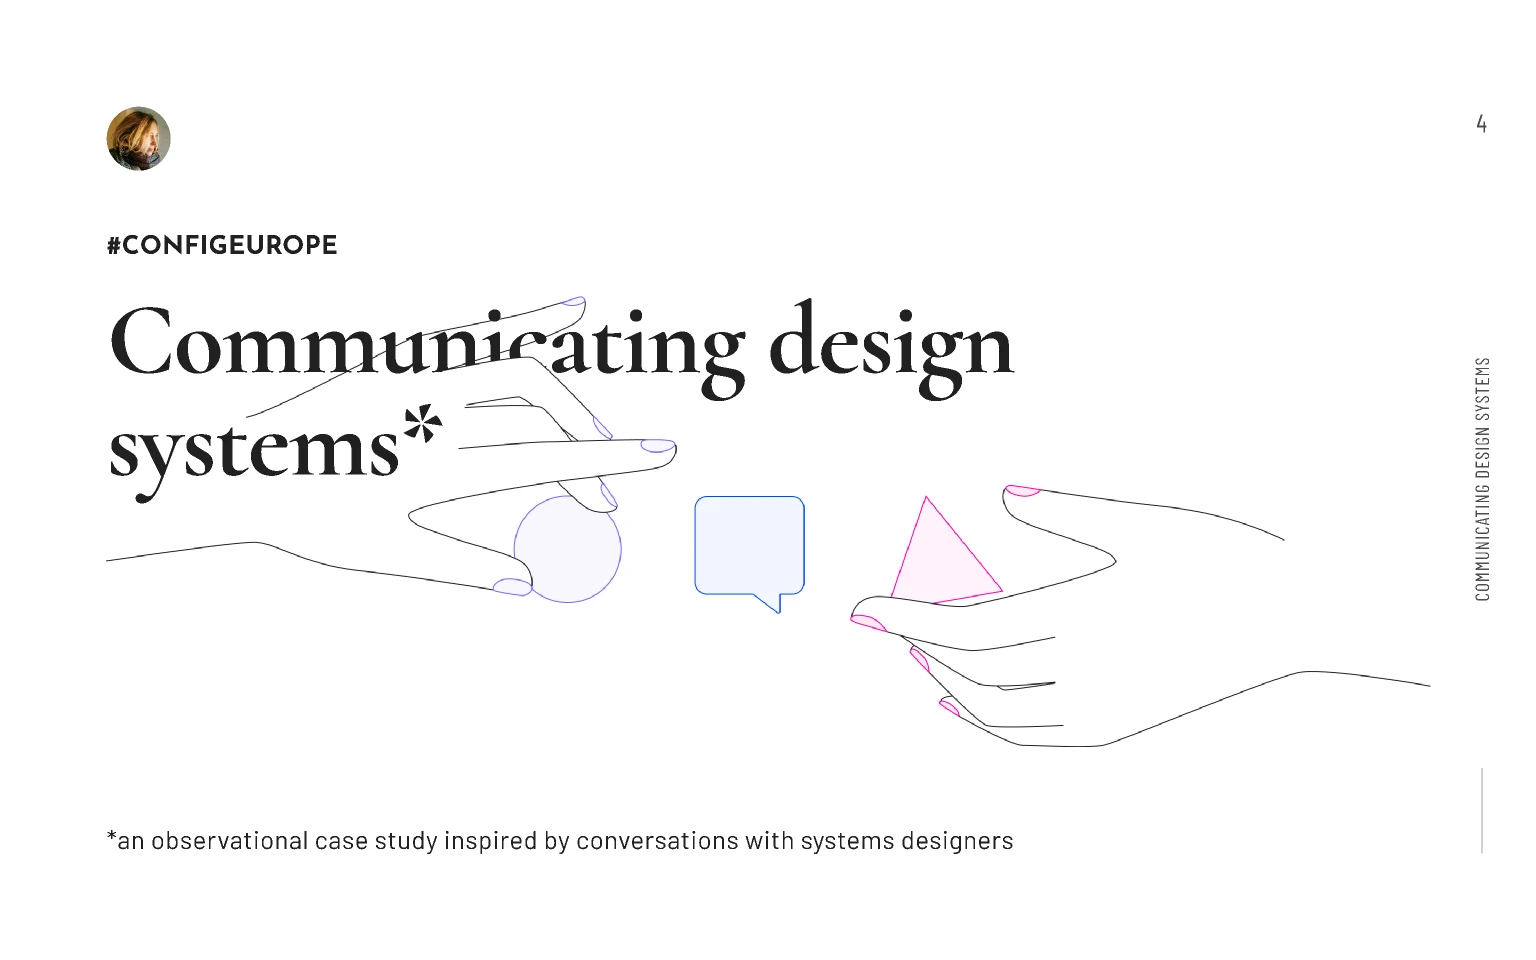 Config Europe  Communicating design systems for Figma and Adobe XD